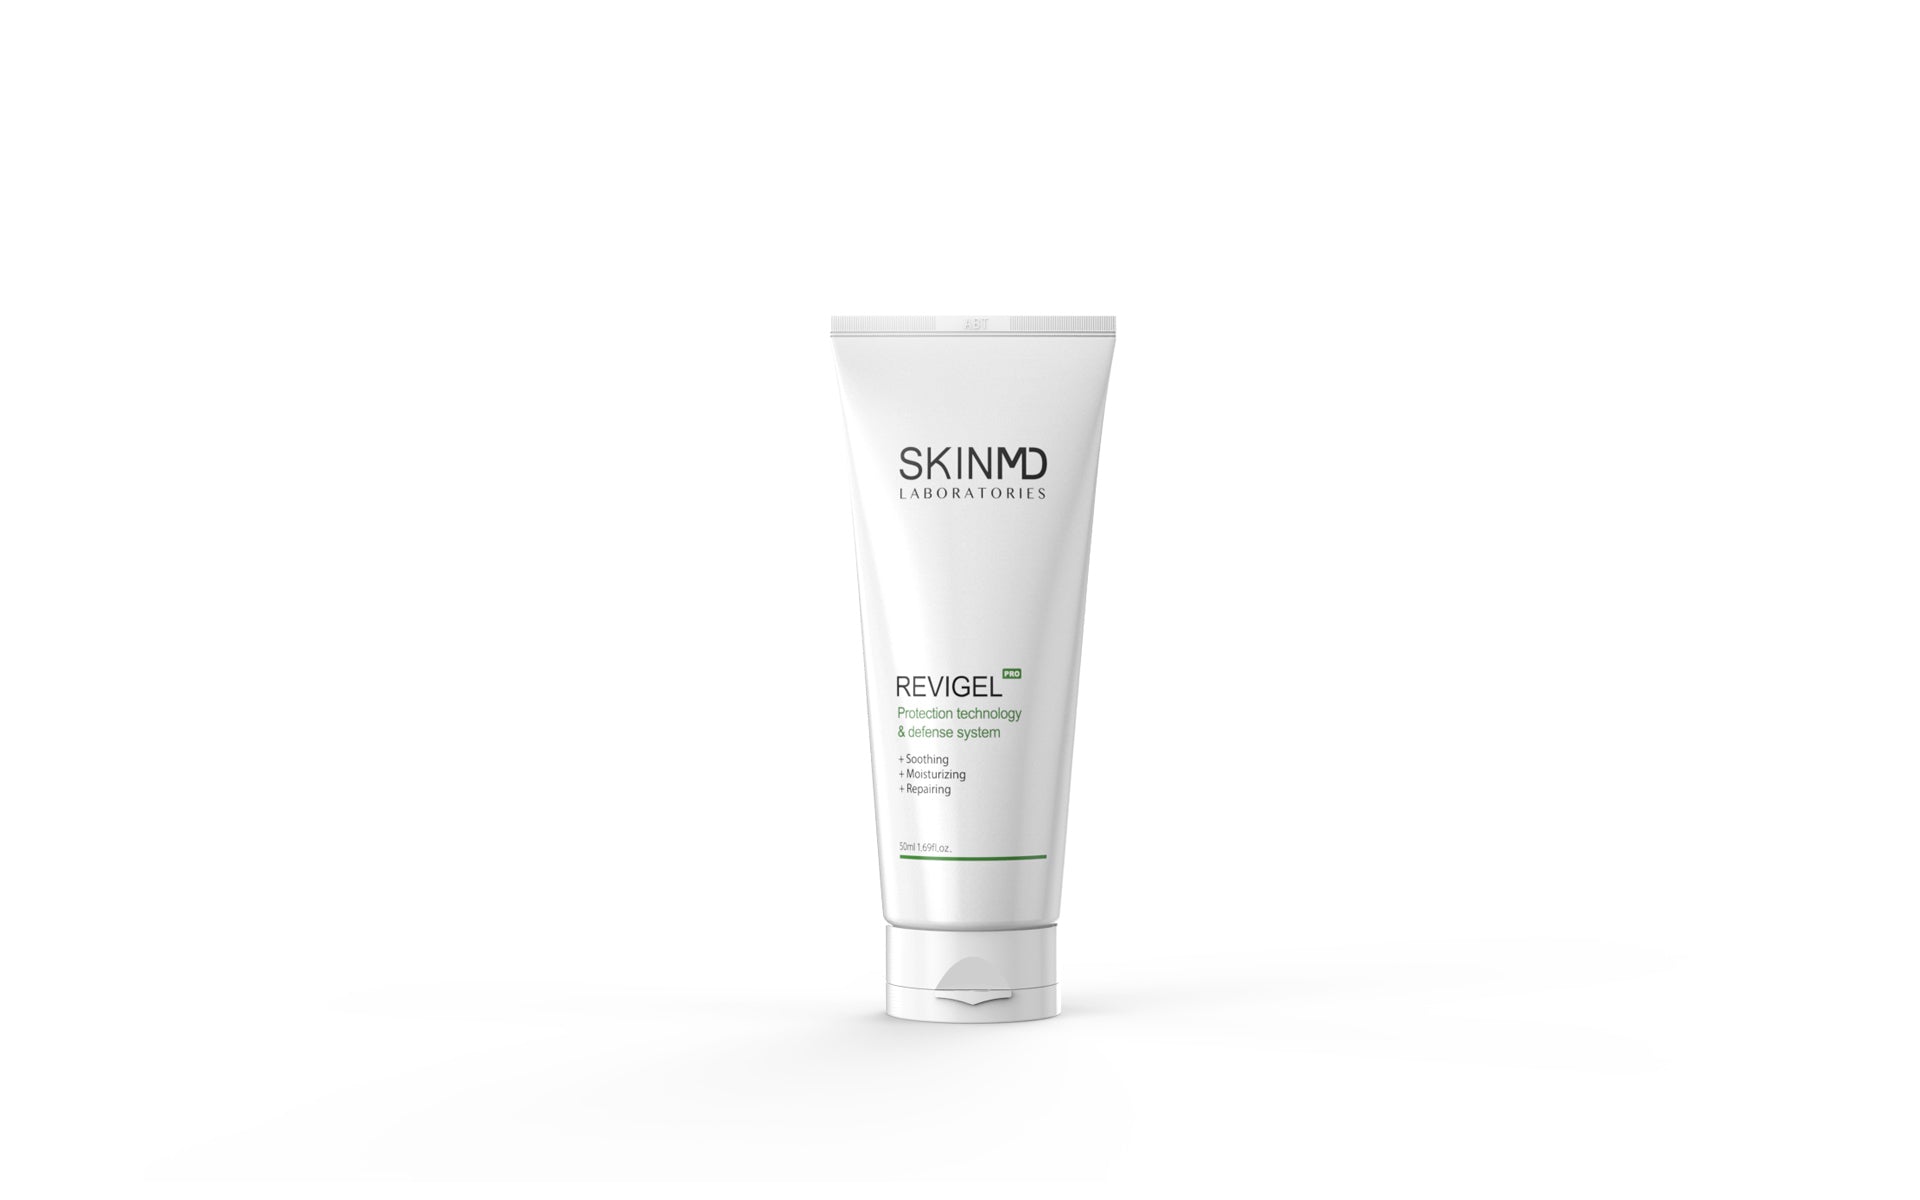 SKINMD LABORATORIES REVIGEL PRO protects outer layer of skin from irritants and toxins of external harmful environment